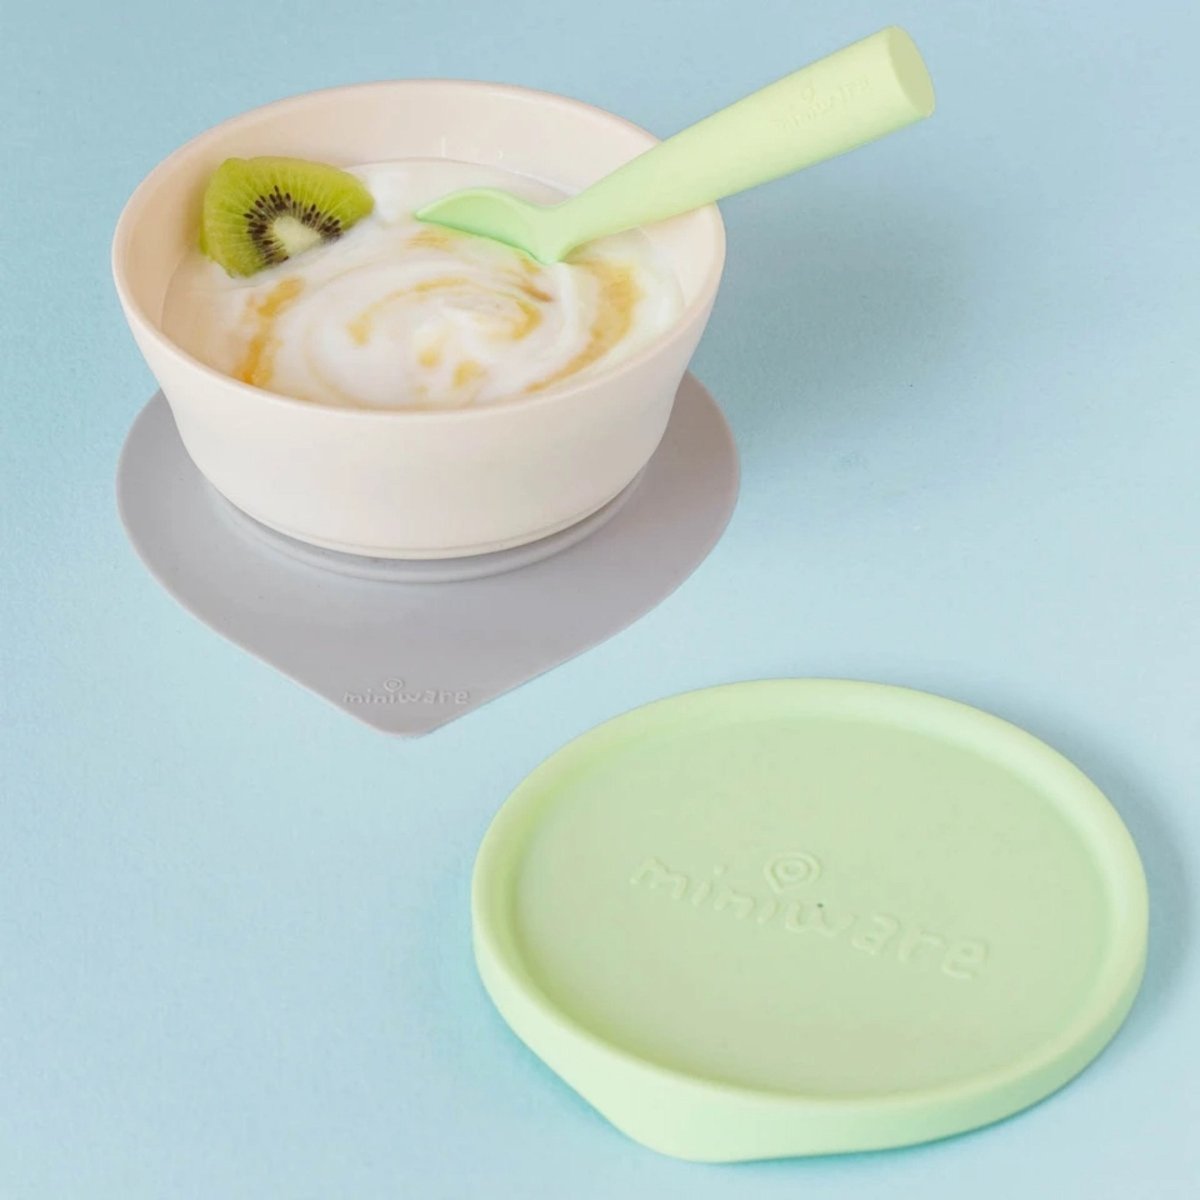 Miniware Suction Bowl With Spoon - Cotton Candy - MWFBCC